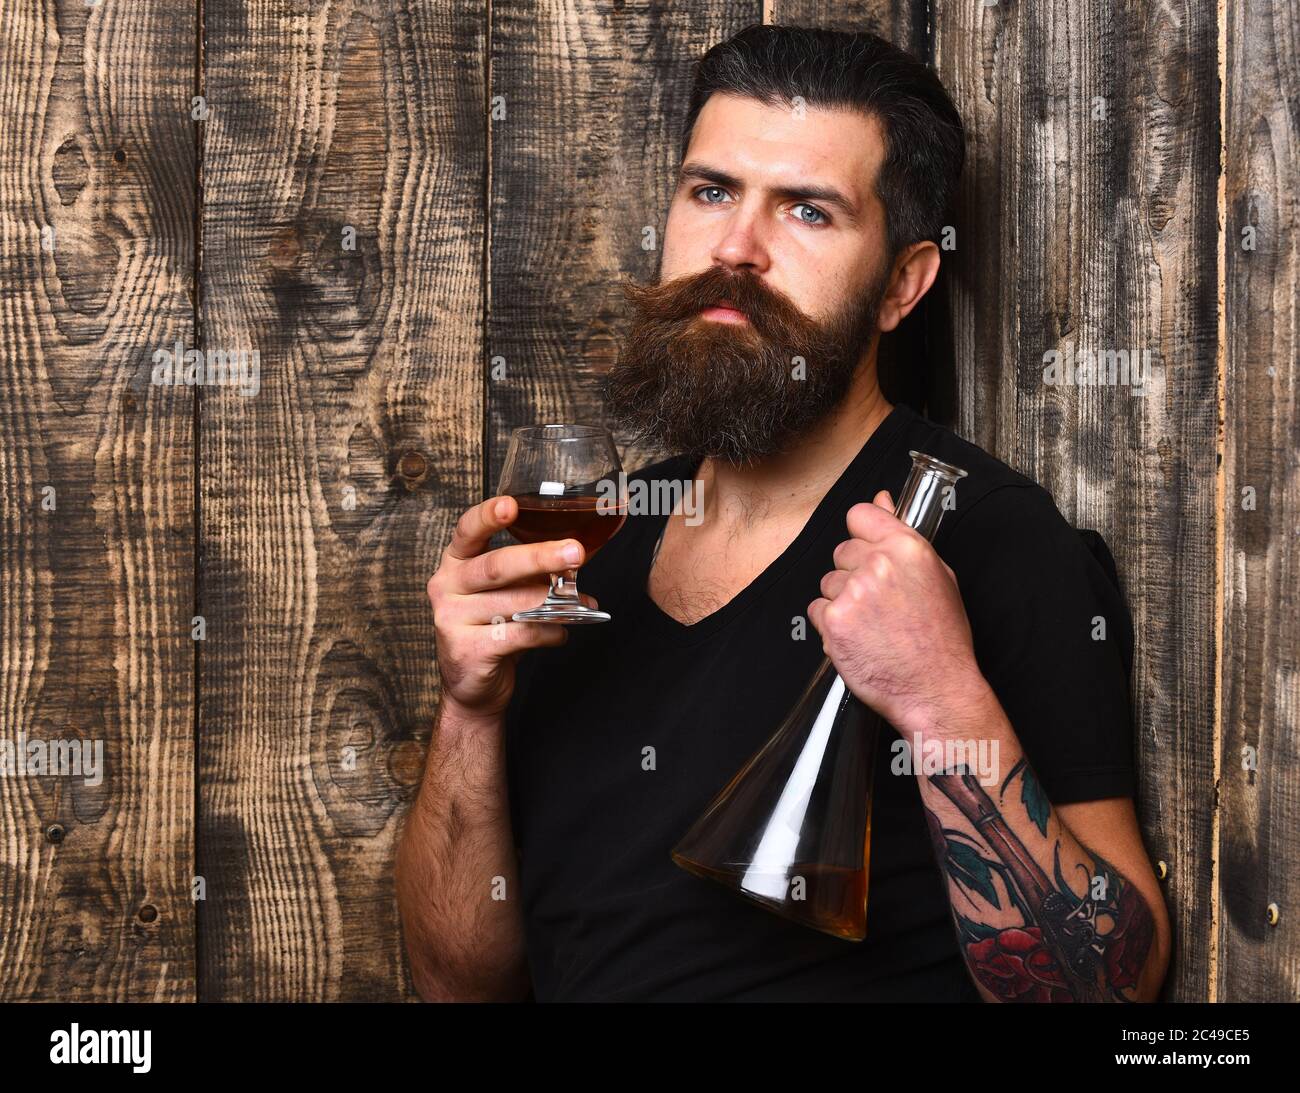 Man with beard and mustache holds alcoholic beverage on wooden wall background. Guy with glass and bottle of cognac. Service and catering concept. Macho with thoughtful face drinks brandy or whiskey. Stock Photo